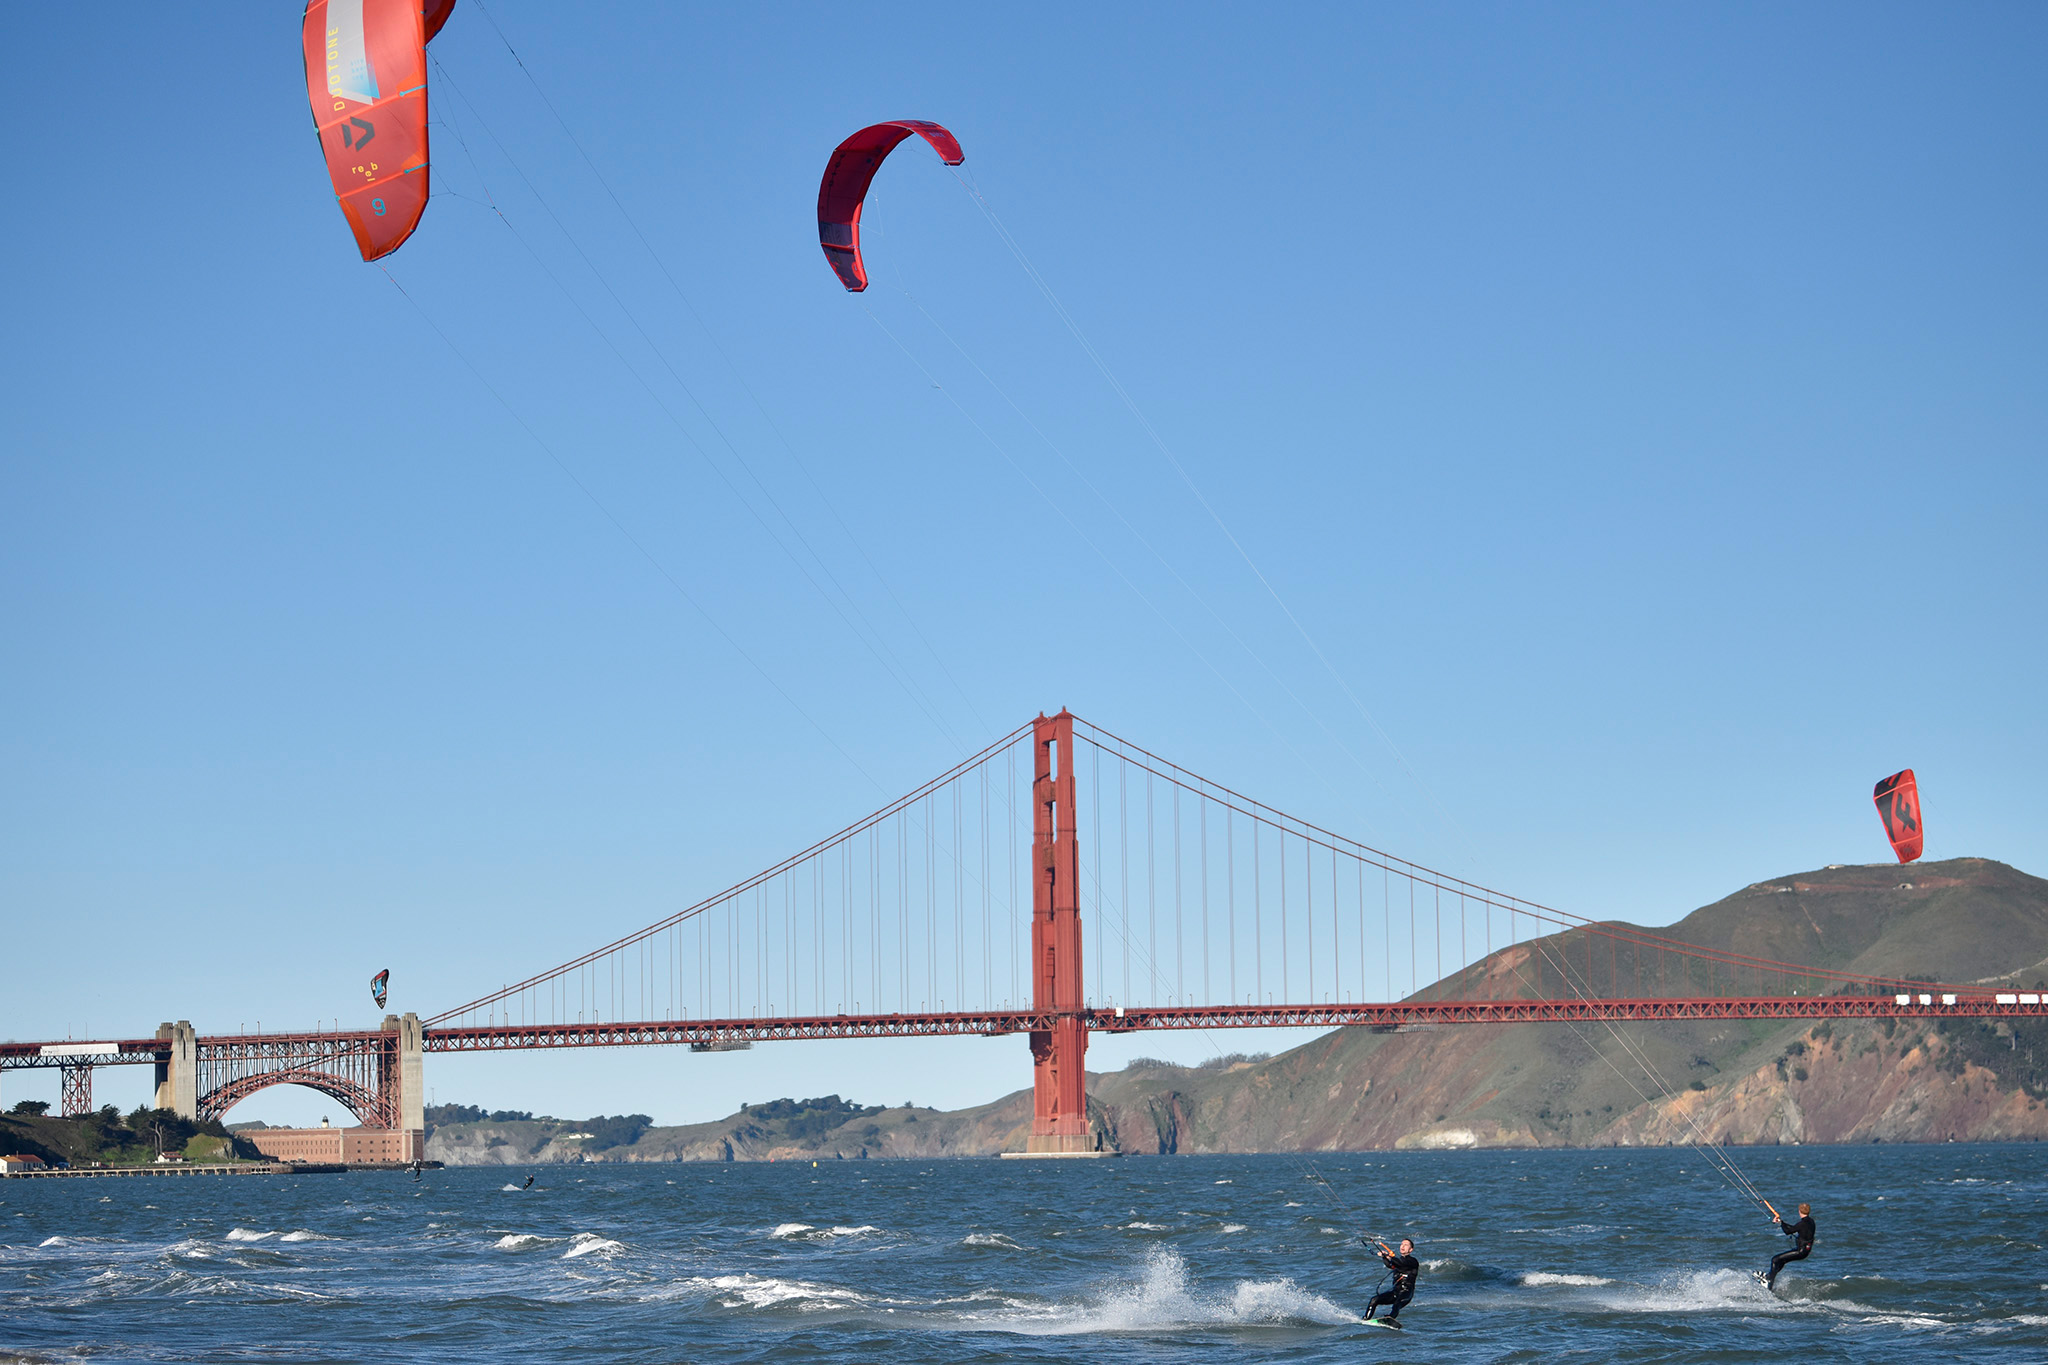 Why is it so windy in the San Francisco Bay Area?